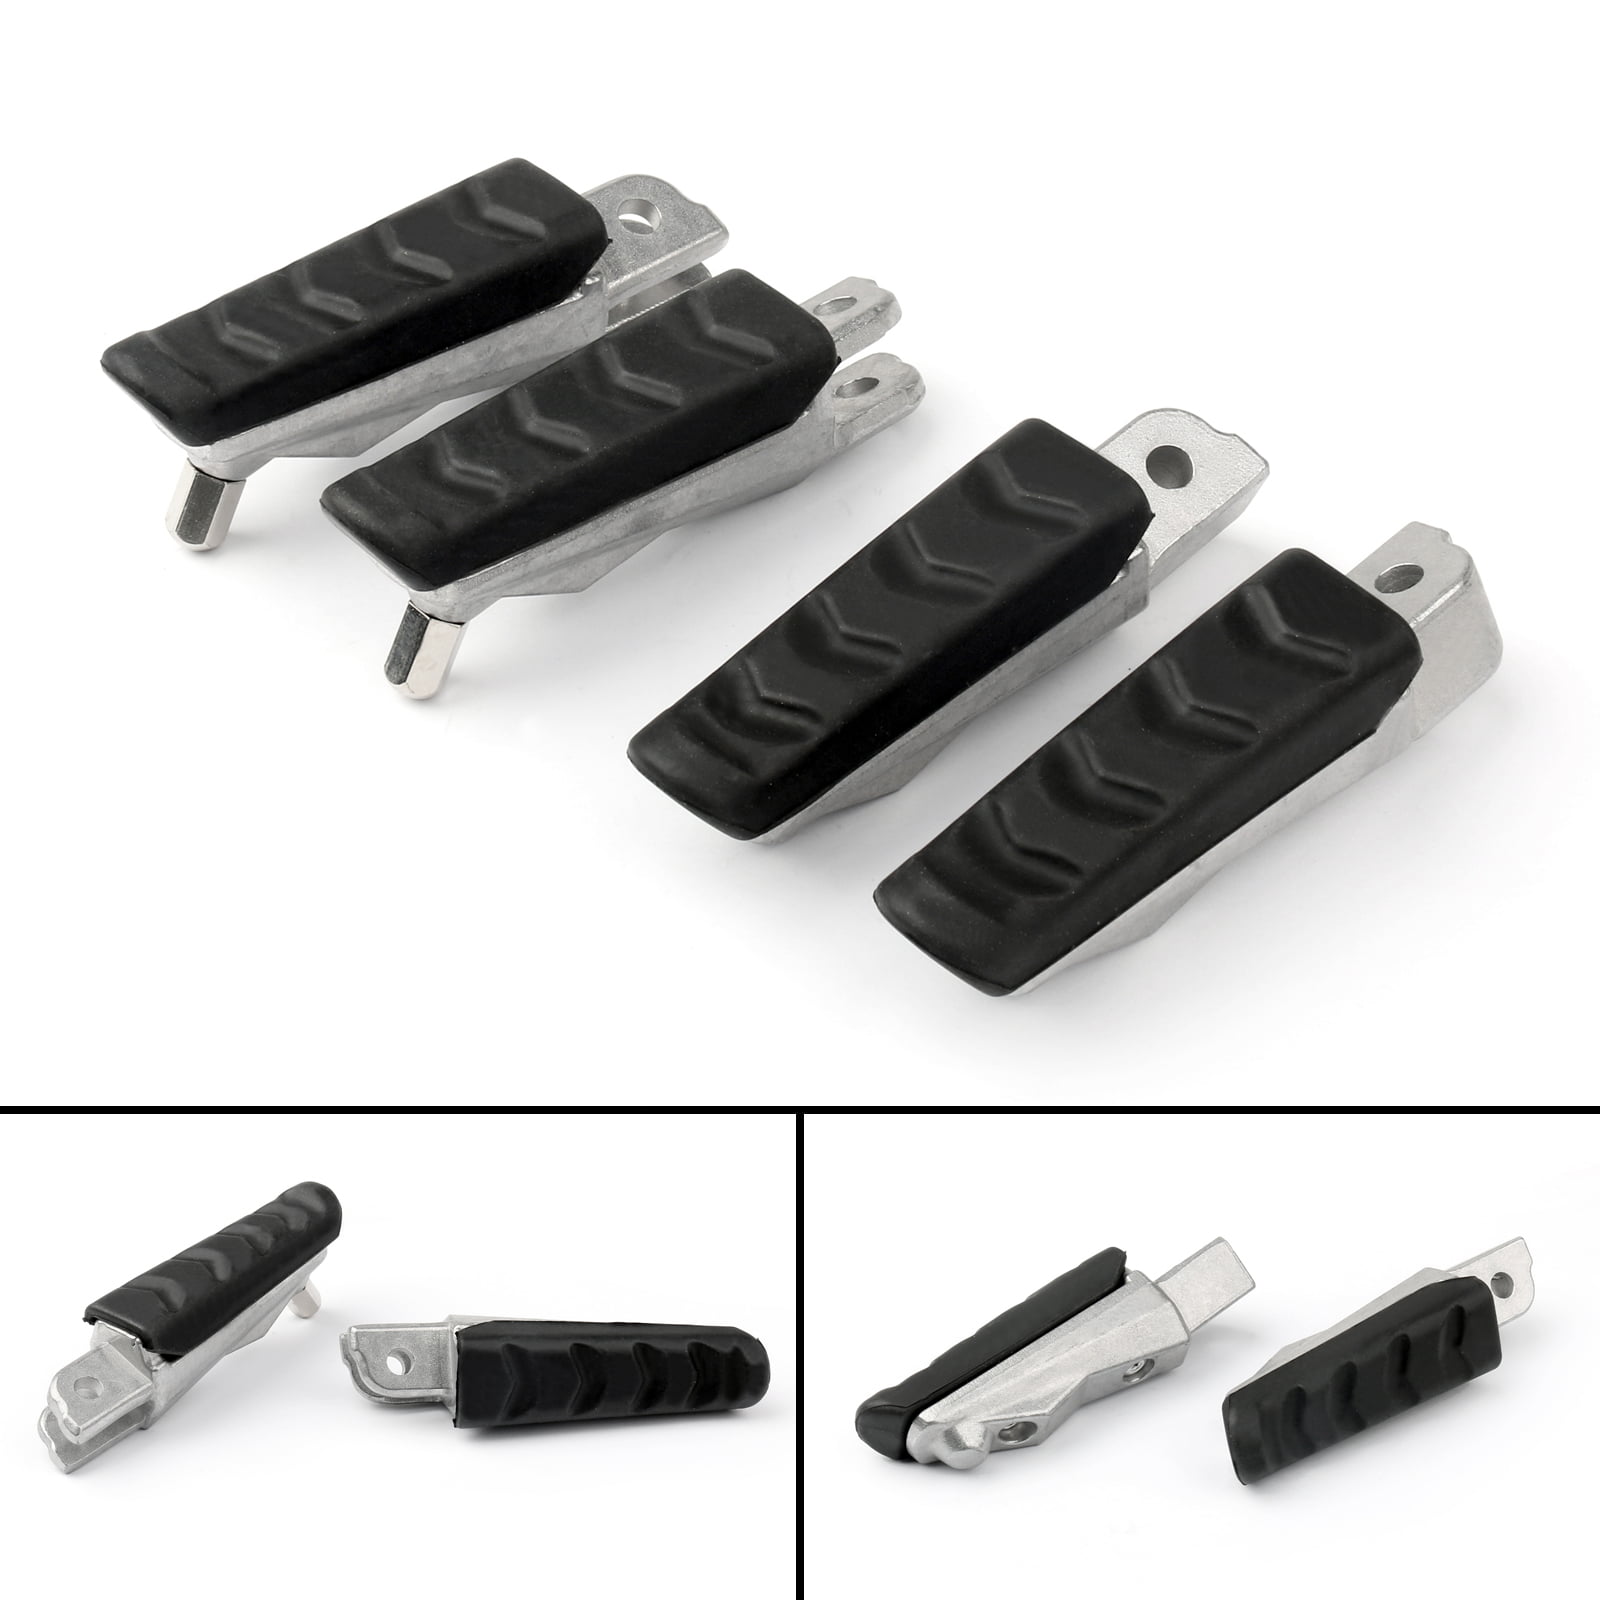 Front Foot Pegs Footrest Fit BMW F800GT 2011-2013/F800ST 2004-2012/F800S 04-08 